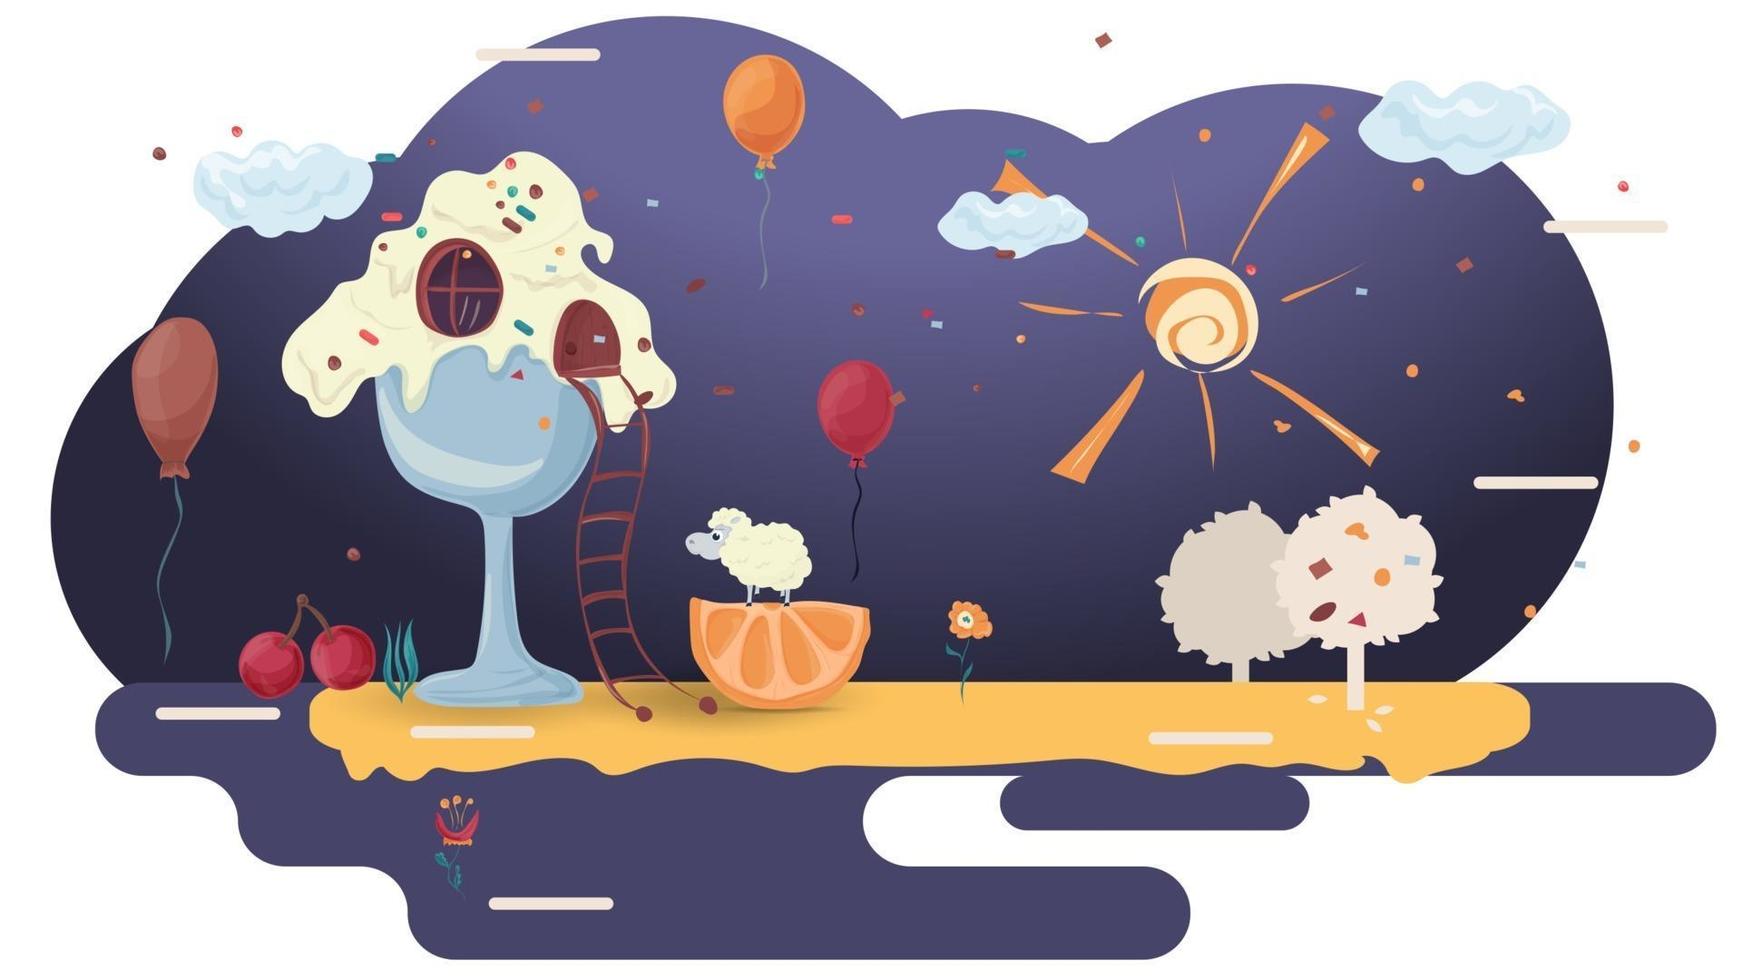 House ice cream with a ladder among the balloons on glazurovki a clearing among the trees flat vector illustration for design